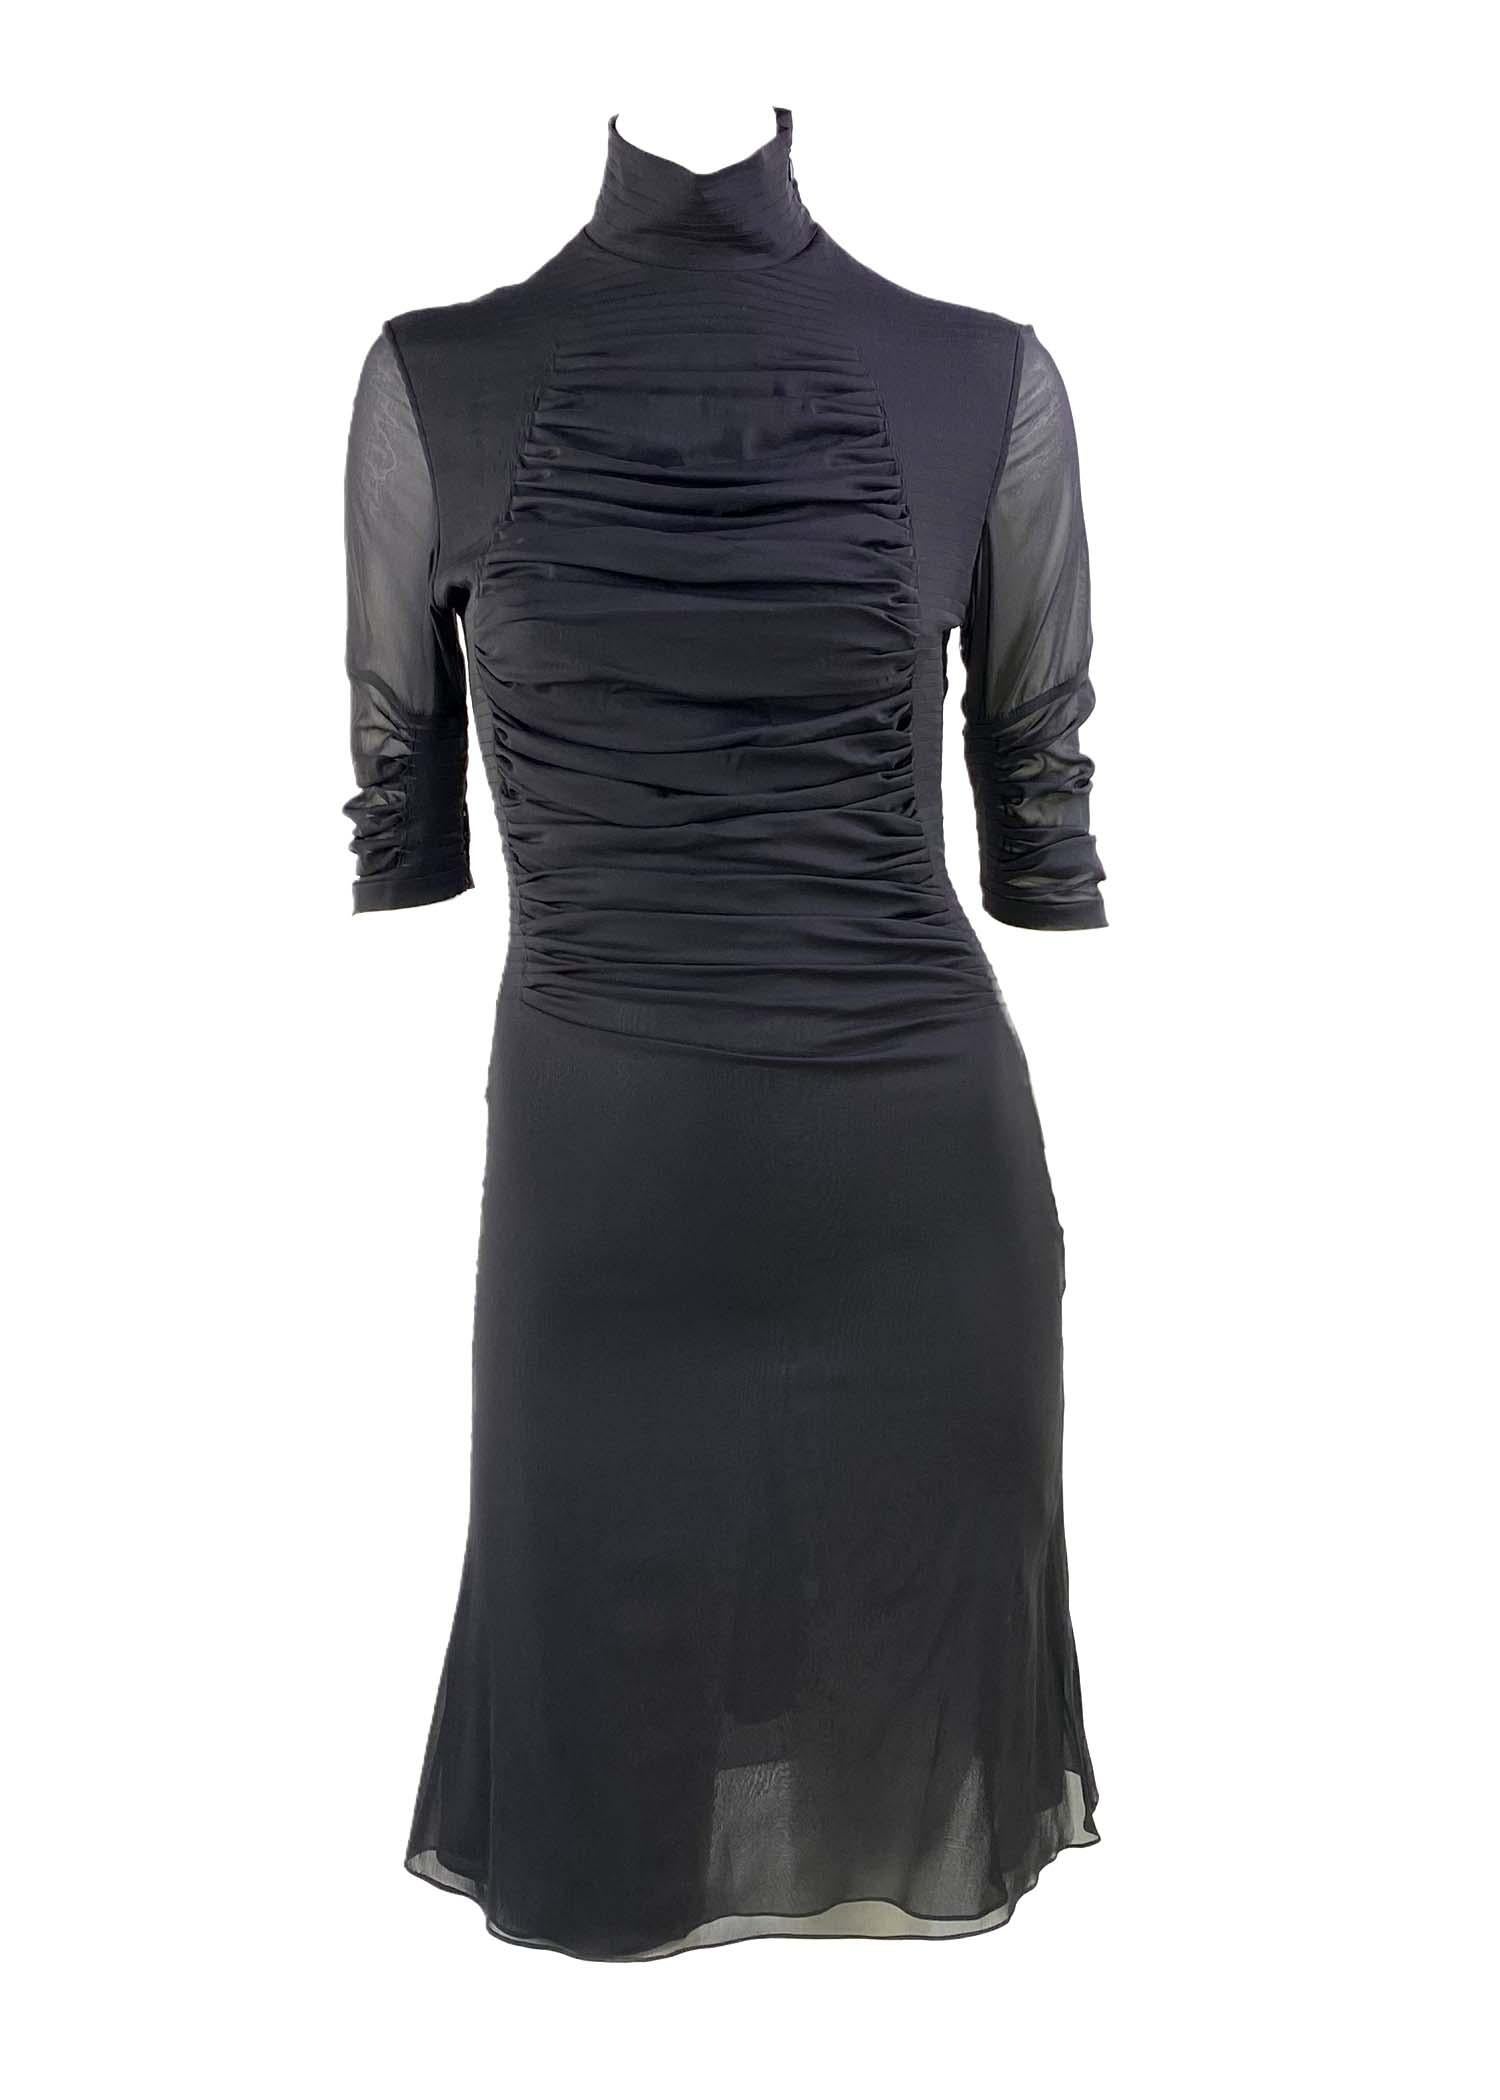 Women's S/S 2001 Yves Saint Laurent by Tom Ford Black Pleated Silk Runway Dress For Sale